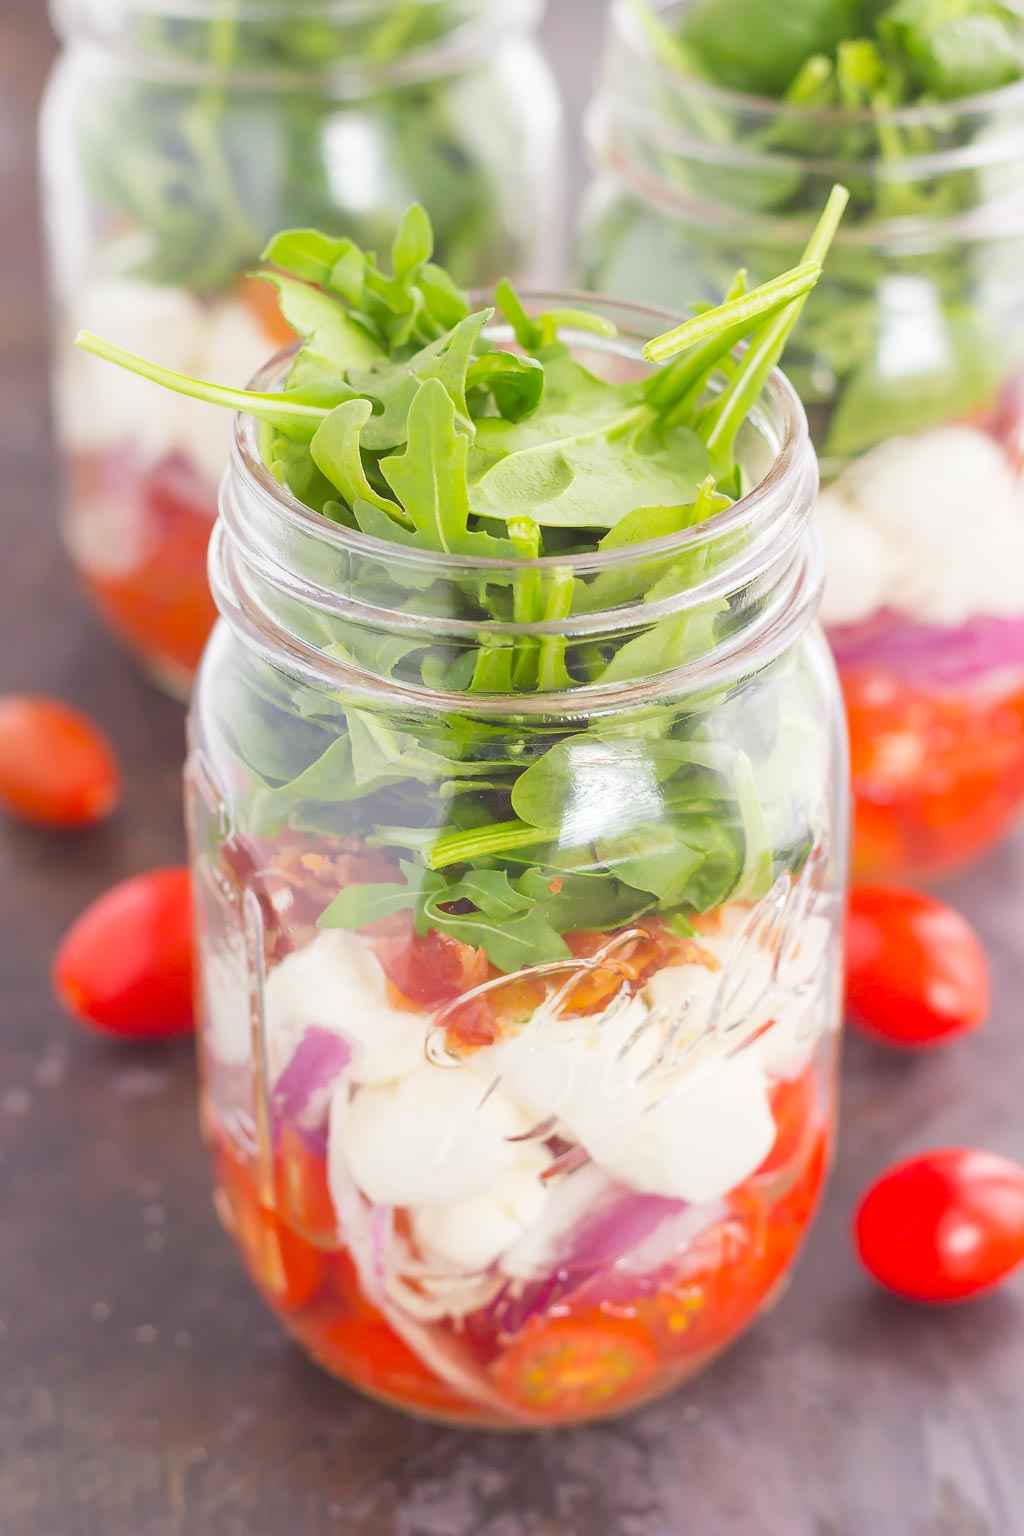 Caprese Mason Jar Salad makes a deliciously easy meal that's perfect for just about any day. Great for meal prepping and perfect as a grab-n-go lunch, you'll love the ease and taste of this classic salad that's fun to make and even better to eat! #salad #capresesalad #masonjar #masonjarsalads #masonjarsaladrecipe #capresemasonjarsalad #capreserecipe #healthysalad #healthylunch